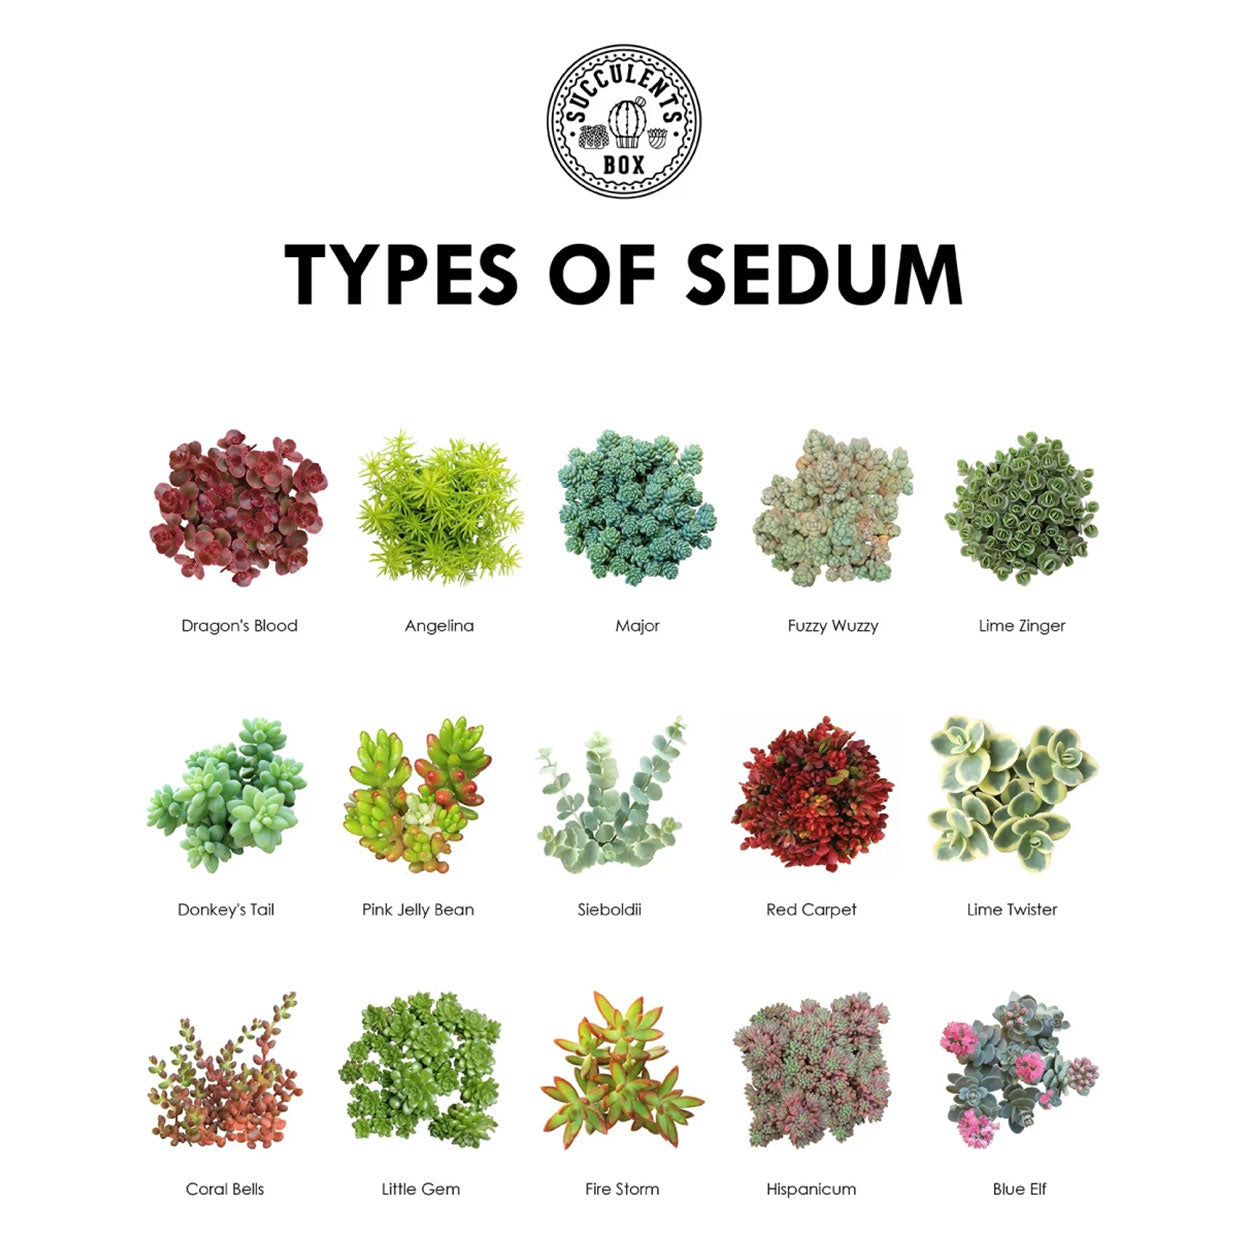 Types of succulents with pictures, Different types of succulents, Succulent Identification Chart, Succulent Types, Identifying Types of Succulents with pictures